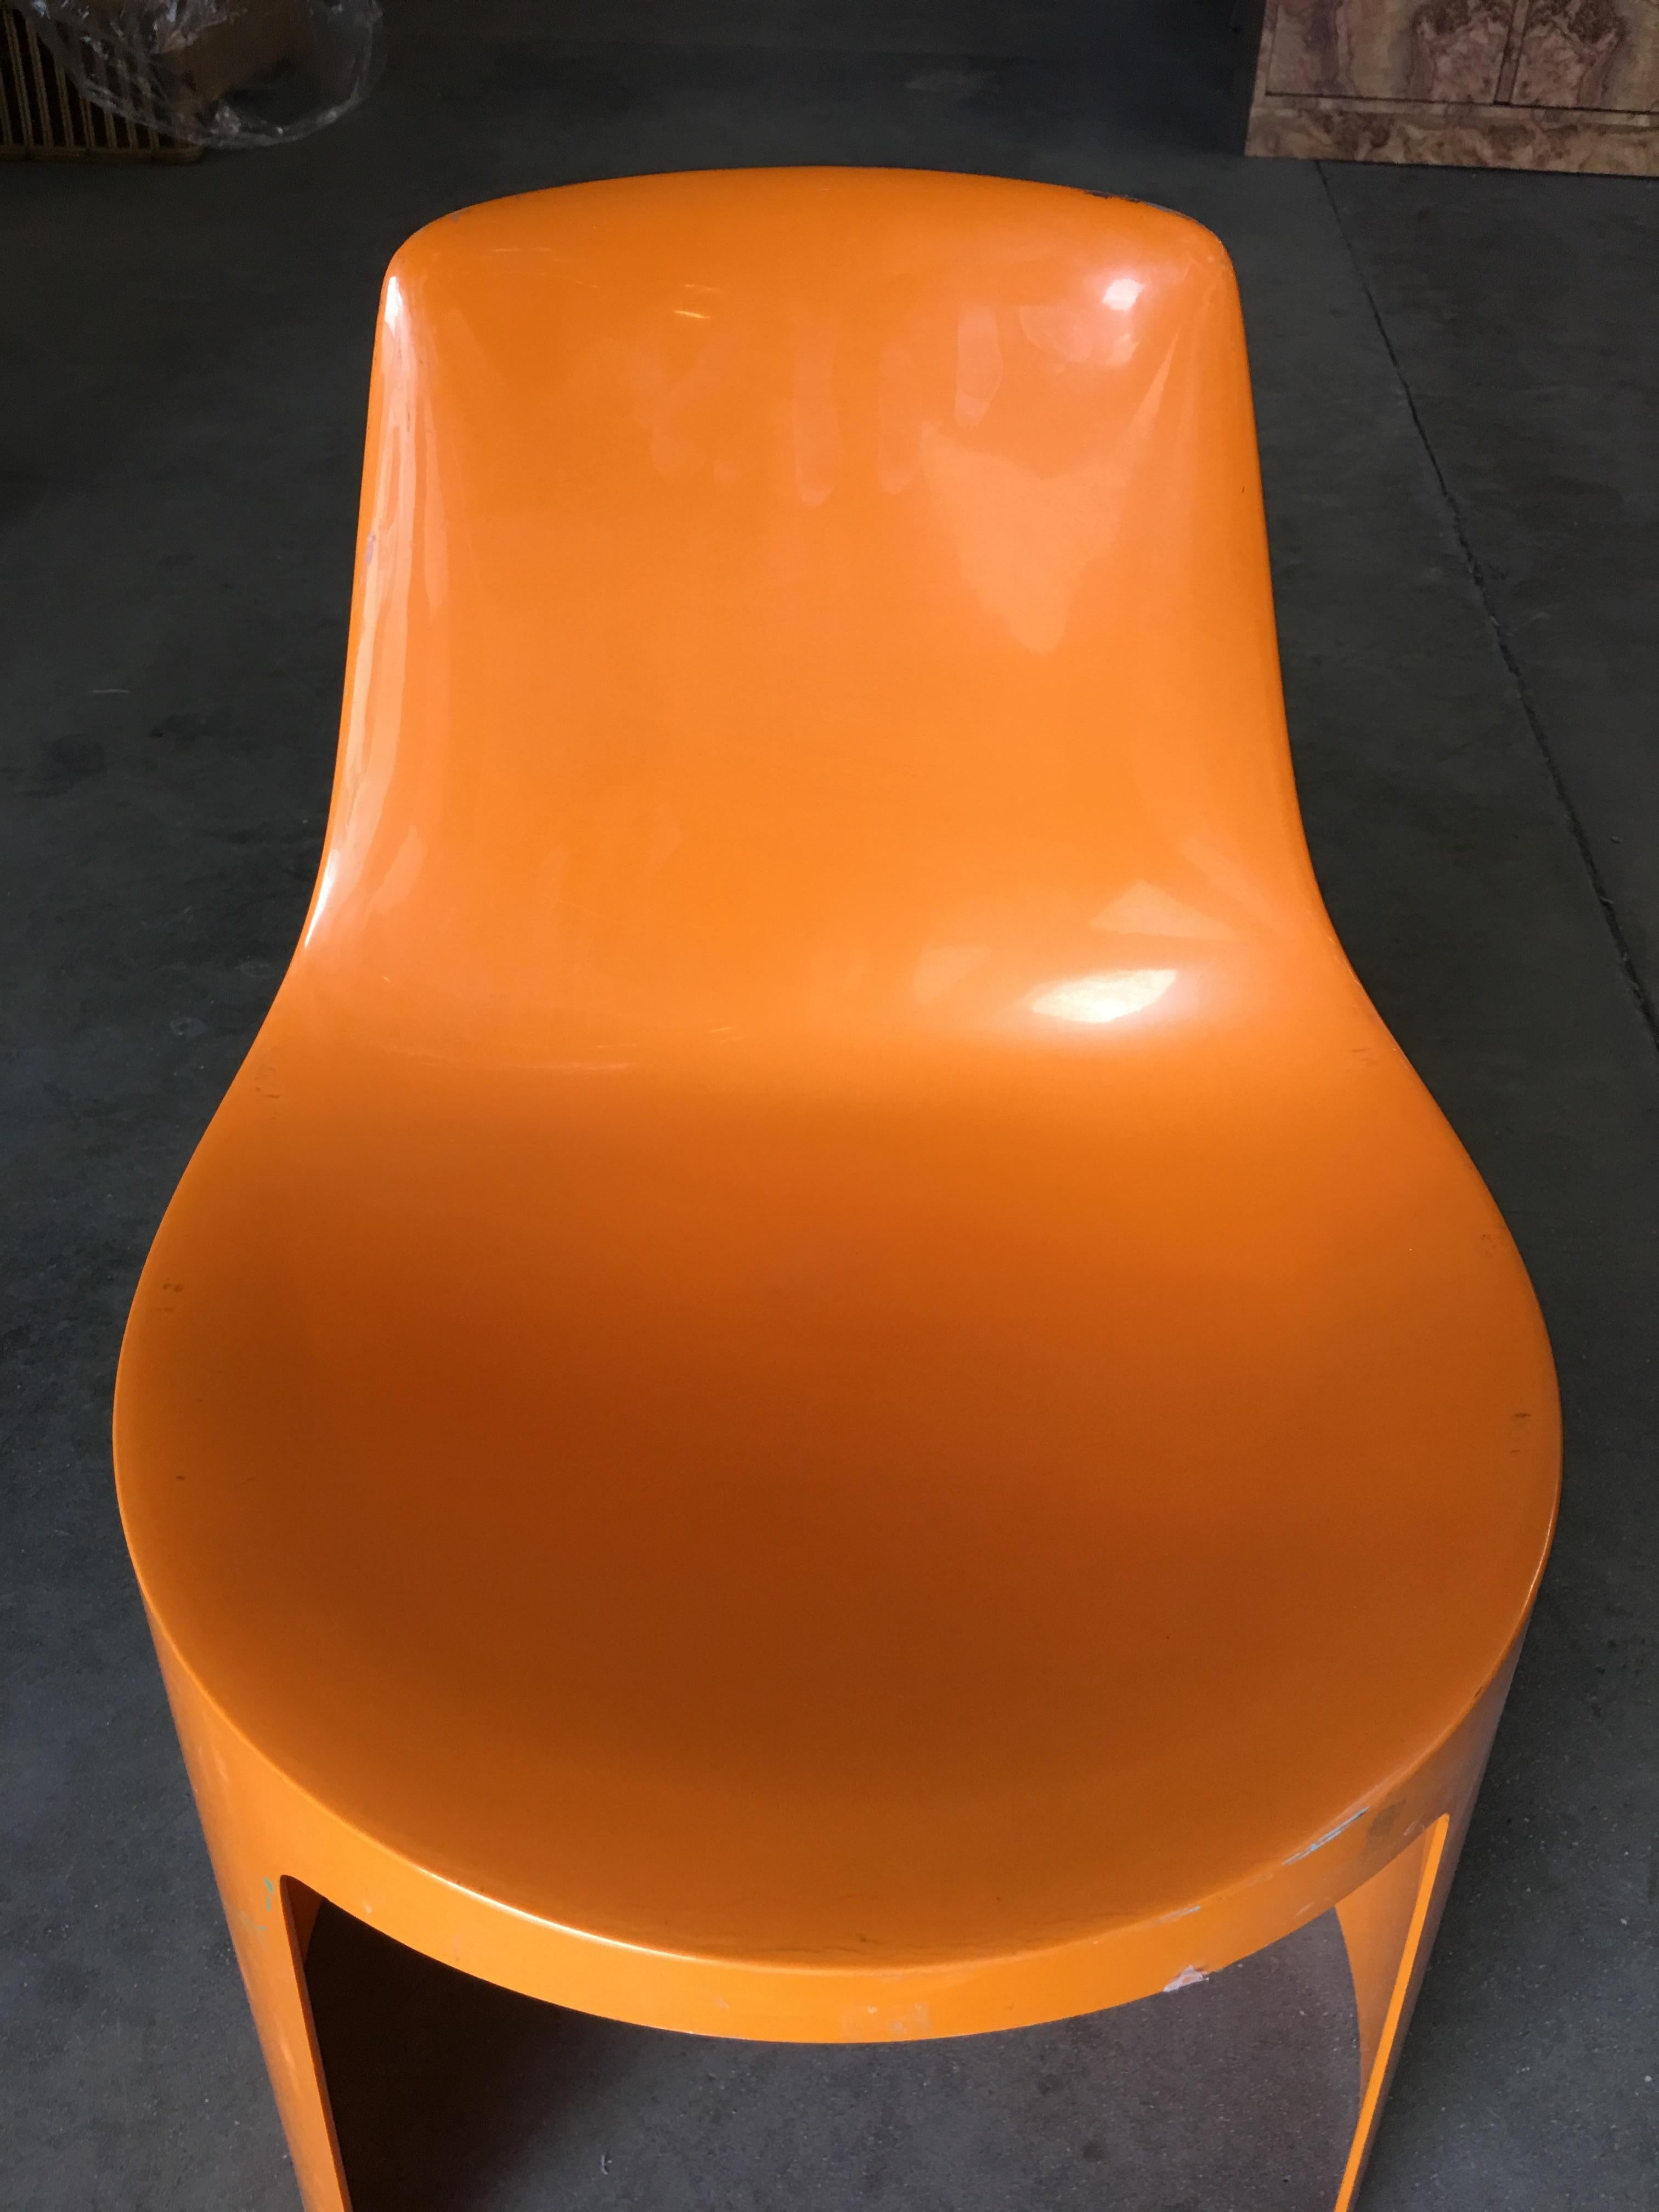 Mid-20th Century Set of 4 Early Swedish Orange Plastic Stacking Side Chairs by Overman